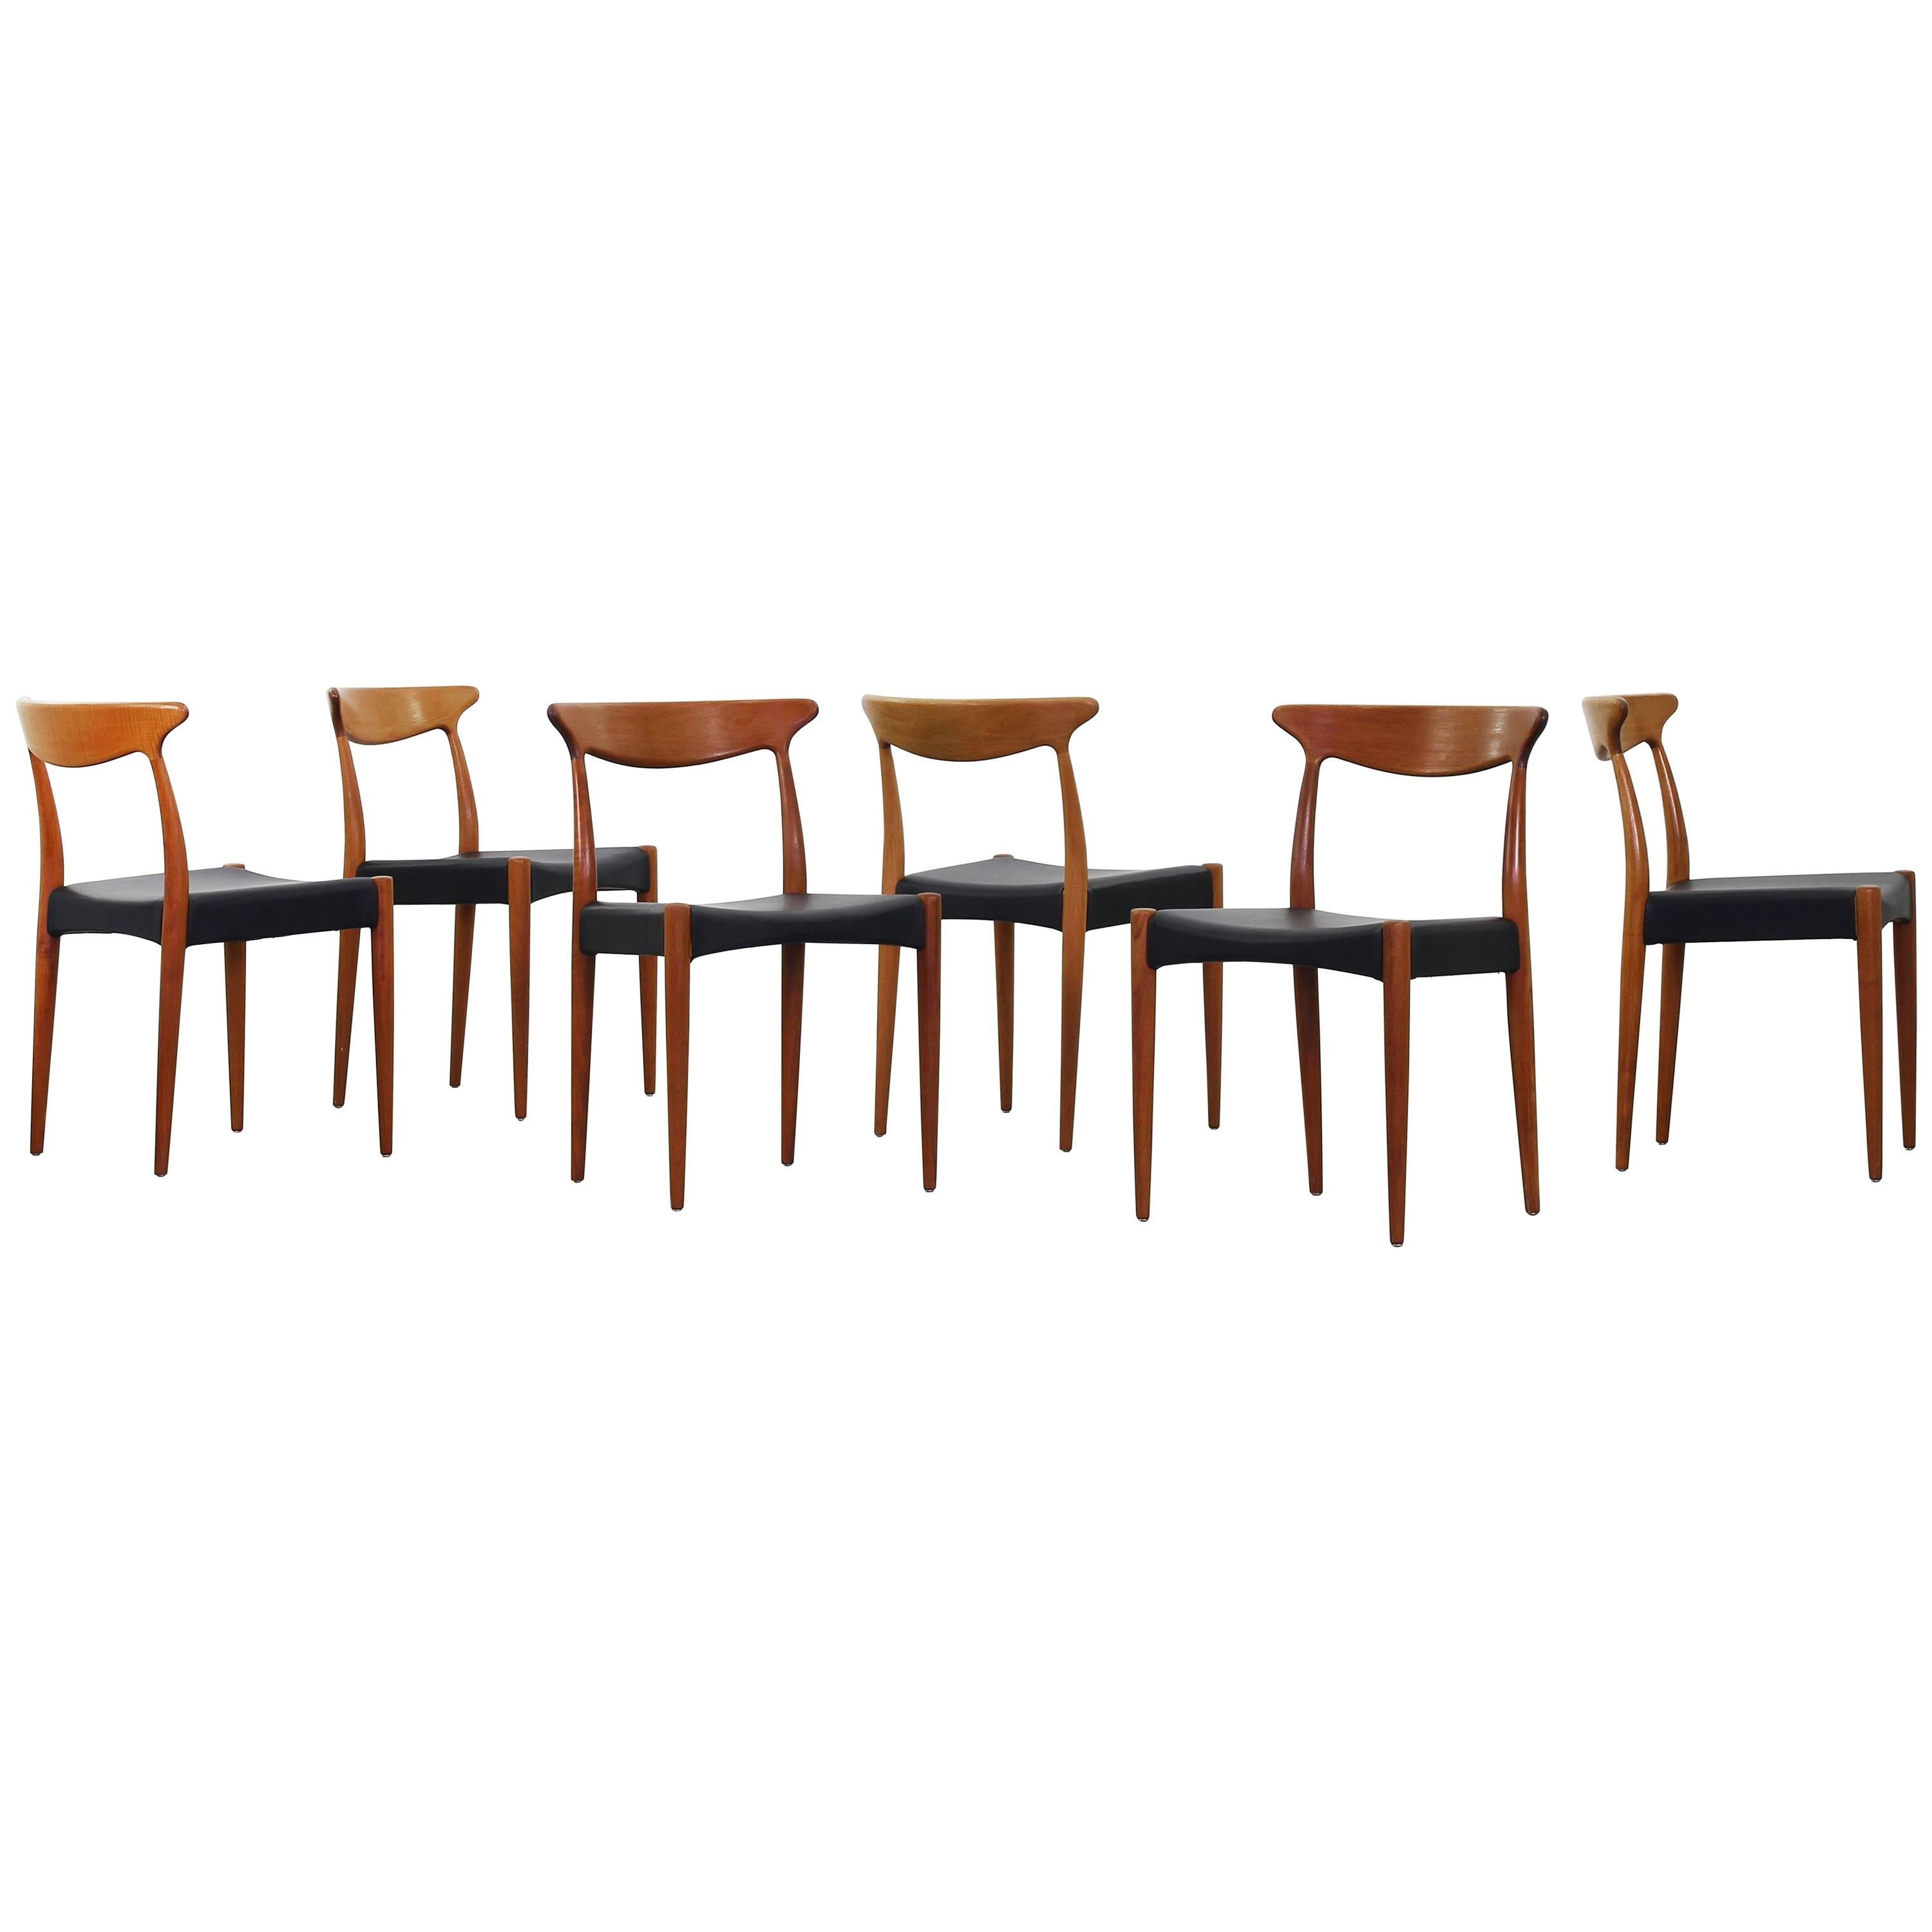 Set of Six Beautiful Dining Chairs by Arne Hovmand Olsen for Mogens Kold